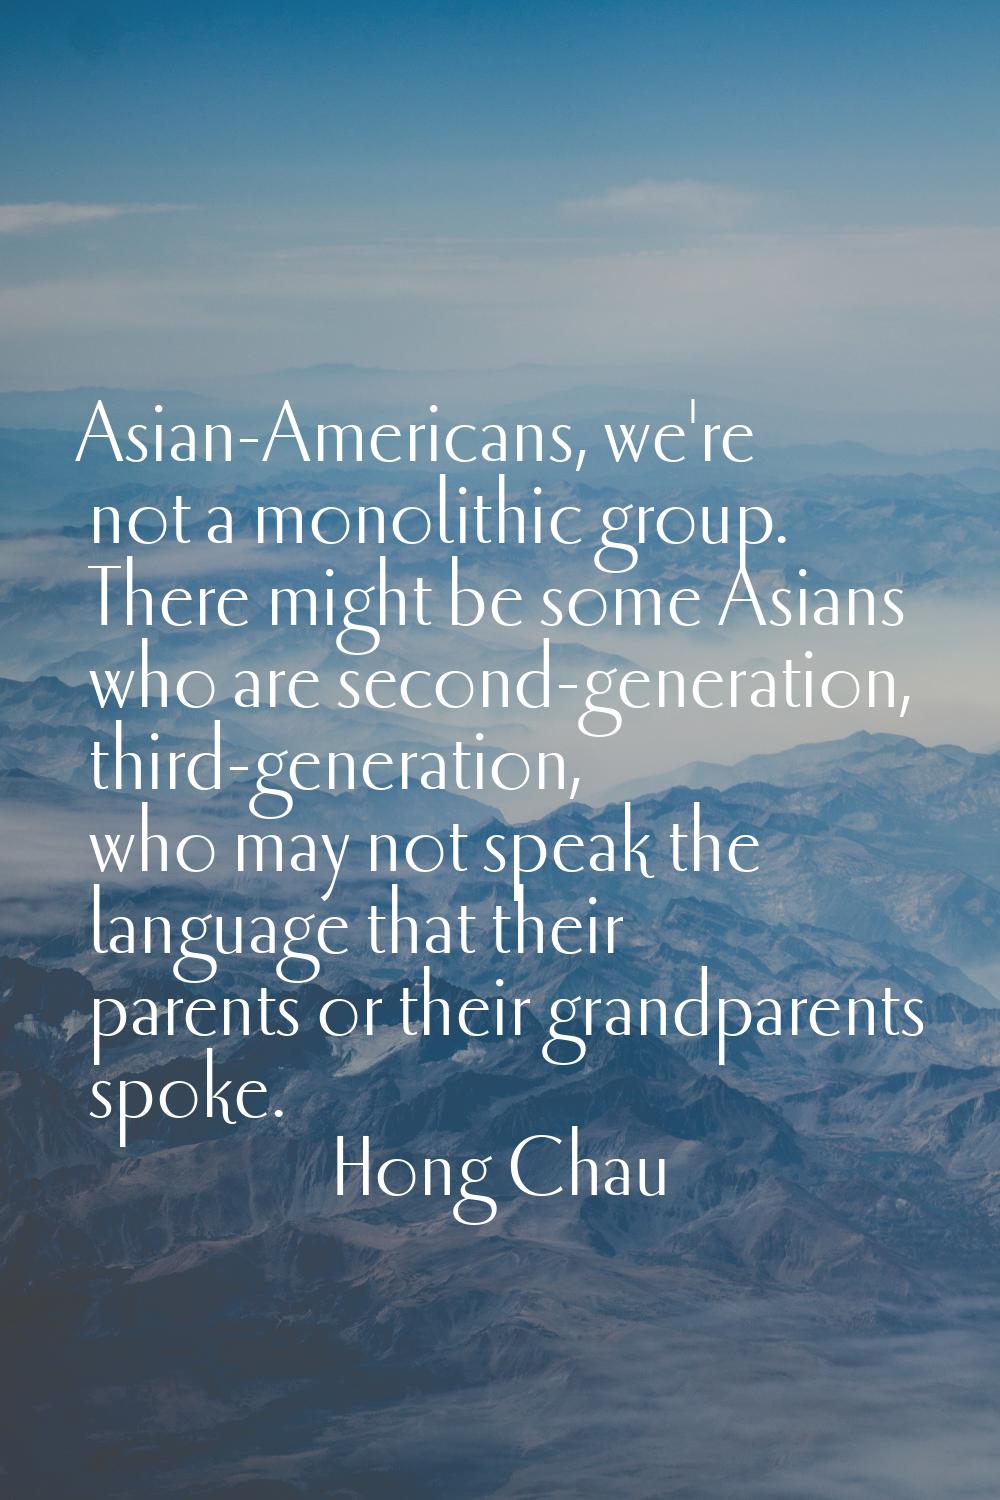 Asian-Americans, we're not a monolithic group. There might be some Asians who are second-generation